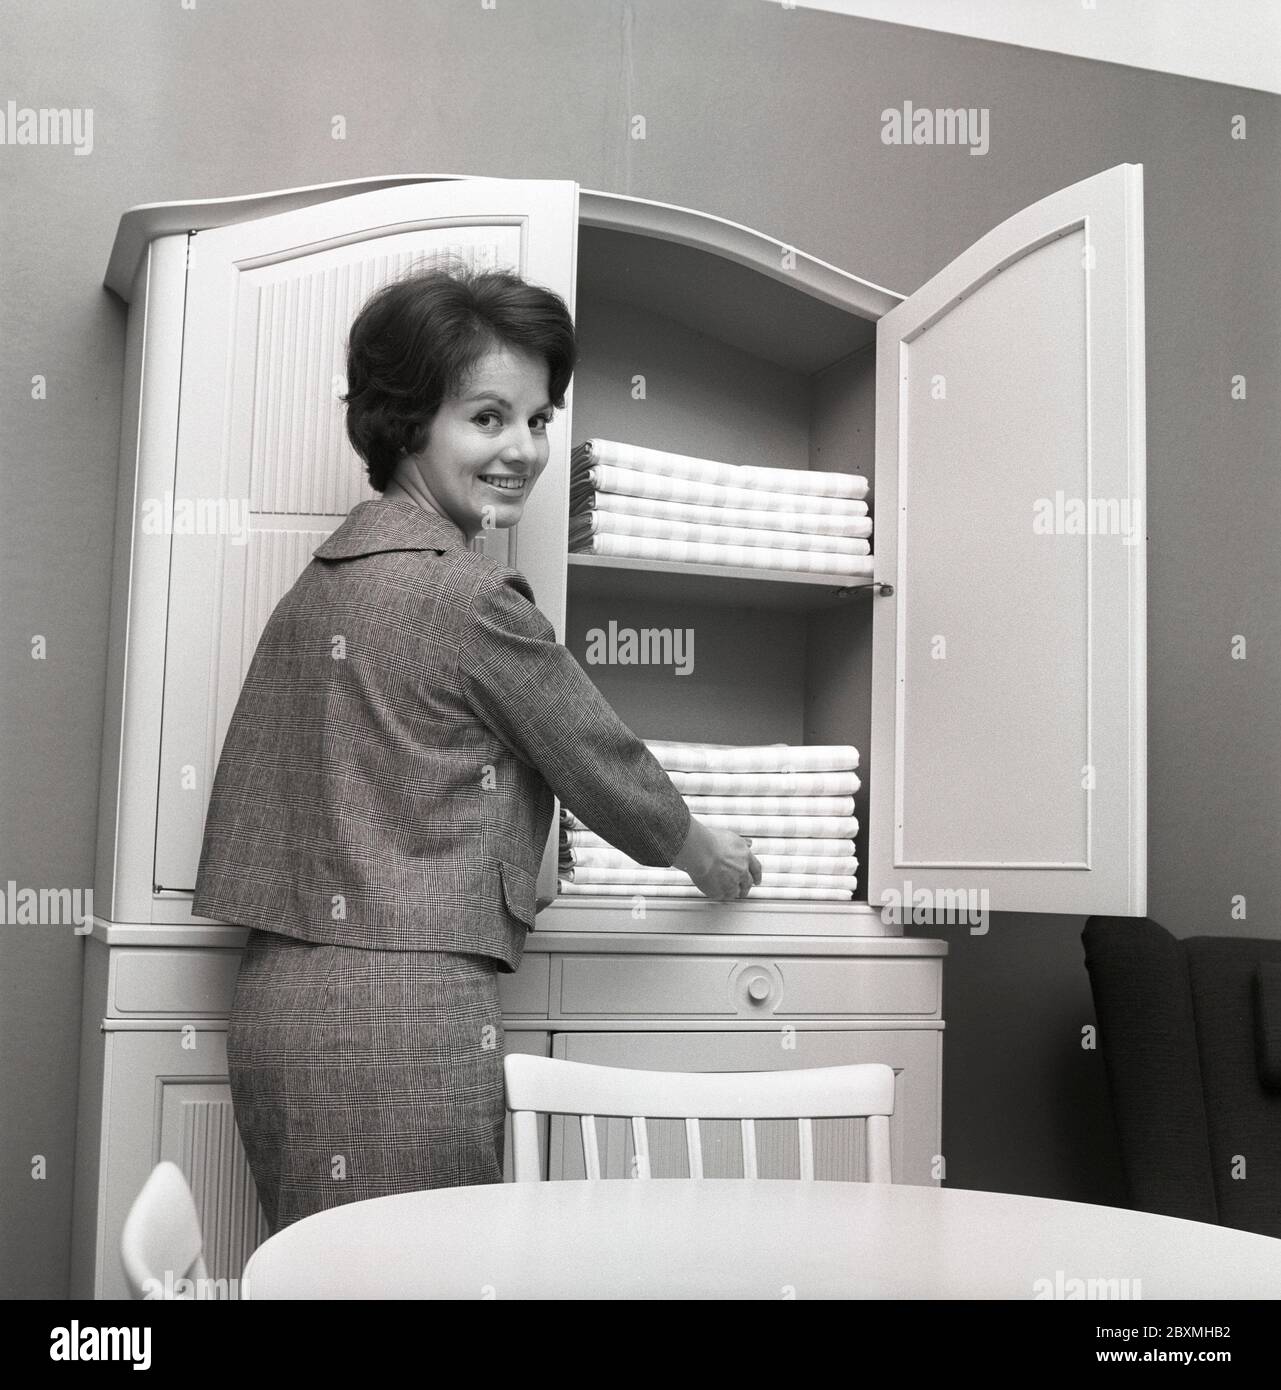 In the 1960s. A woman is putting in linen in a nice carpented cupboard by swedish designer Carl Malmsten.  Sweden 1960. Kristoffersson Ref CS12-1 Stock Photo